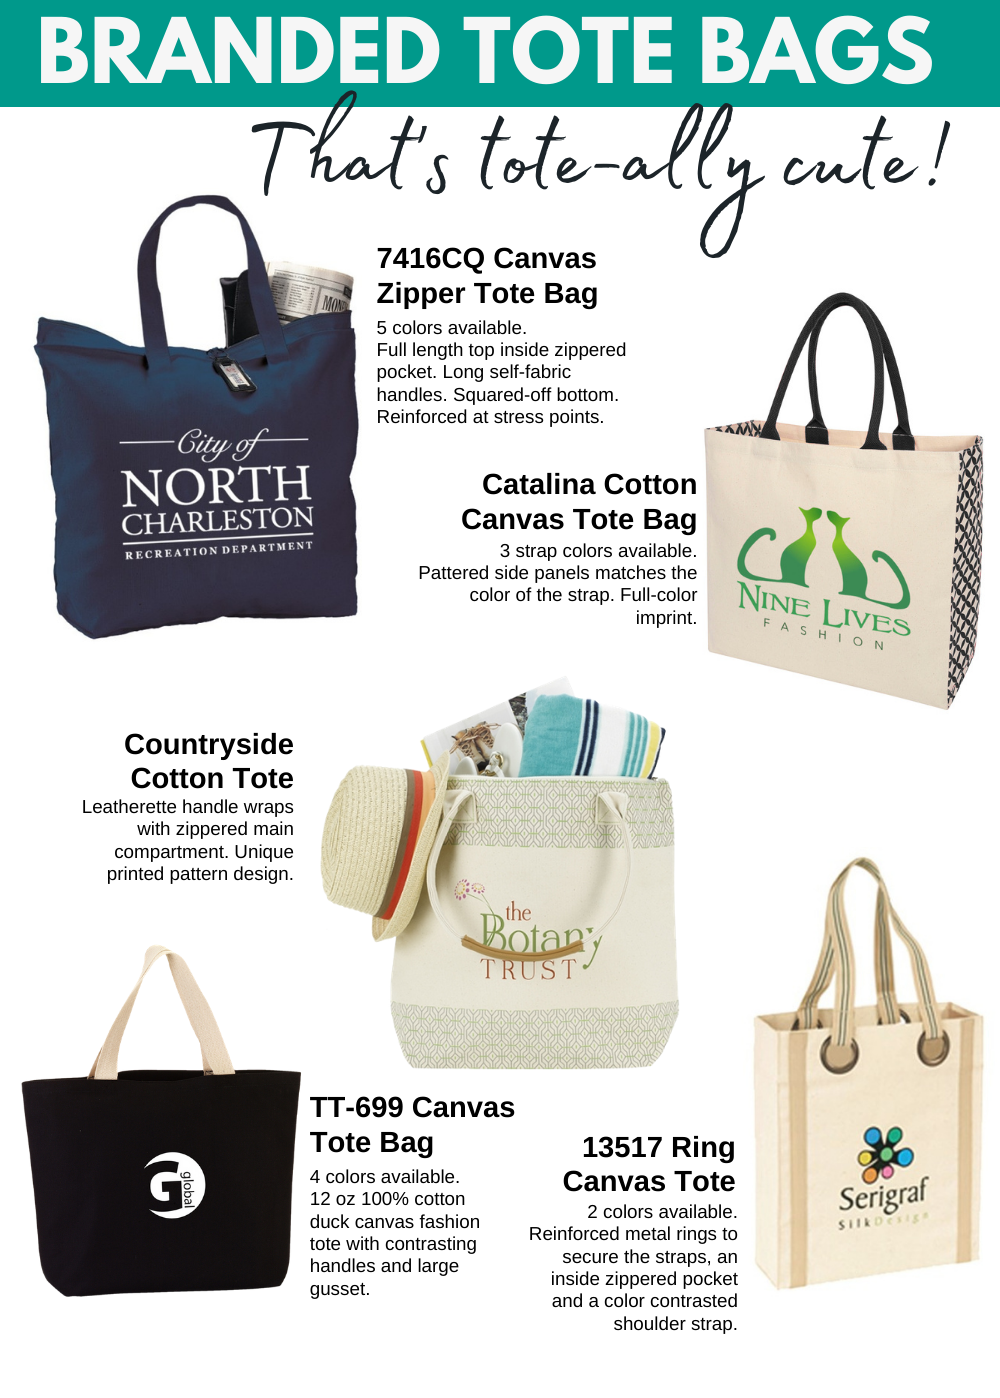 Green Marketing Ideas: Heavy Duty Canvas Tote Bags with Classy Design Features. Order in bulk and add logo custom print with Brand Spirit.